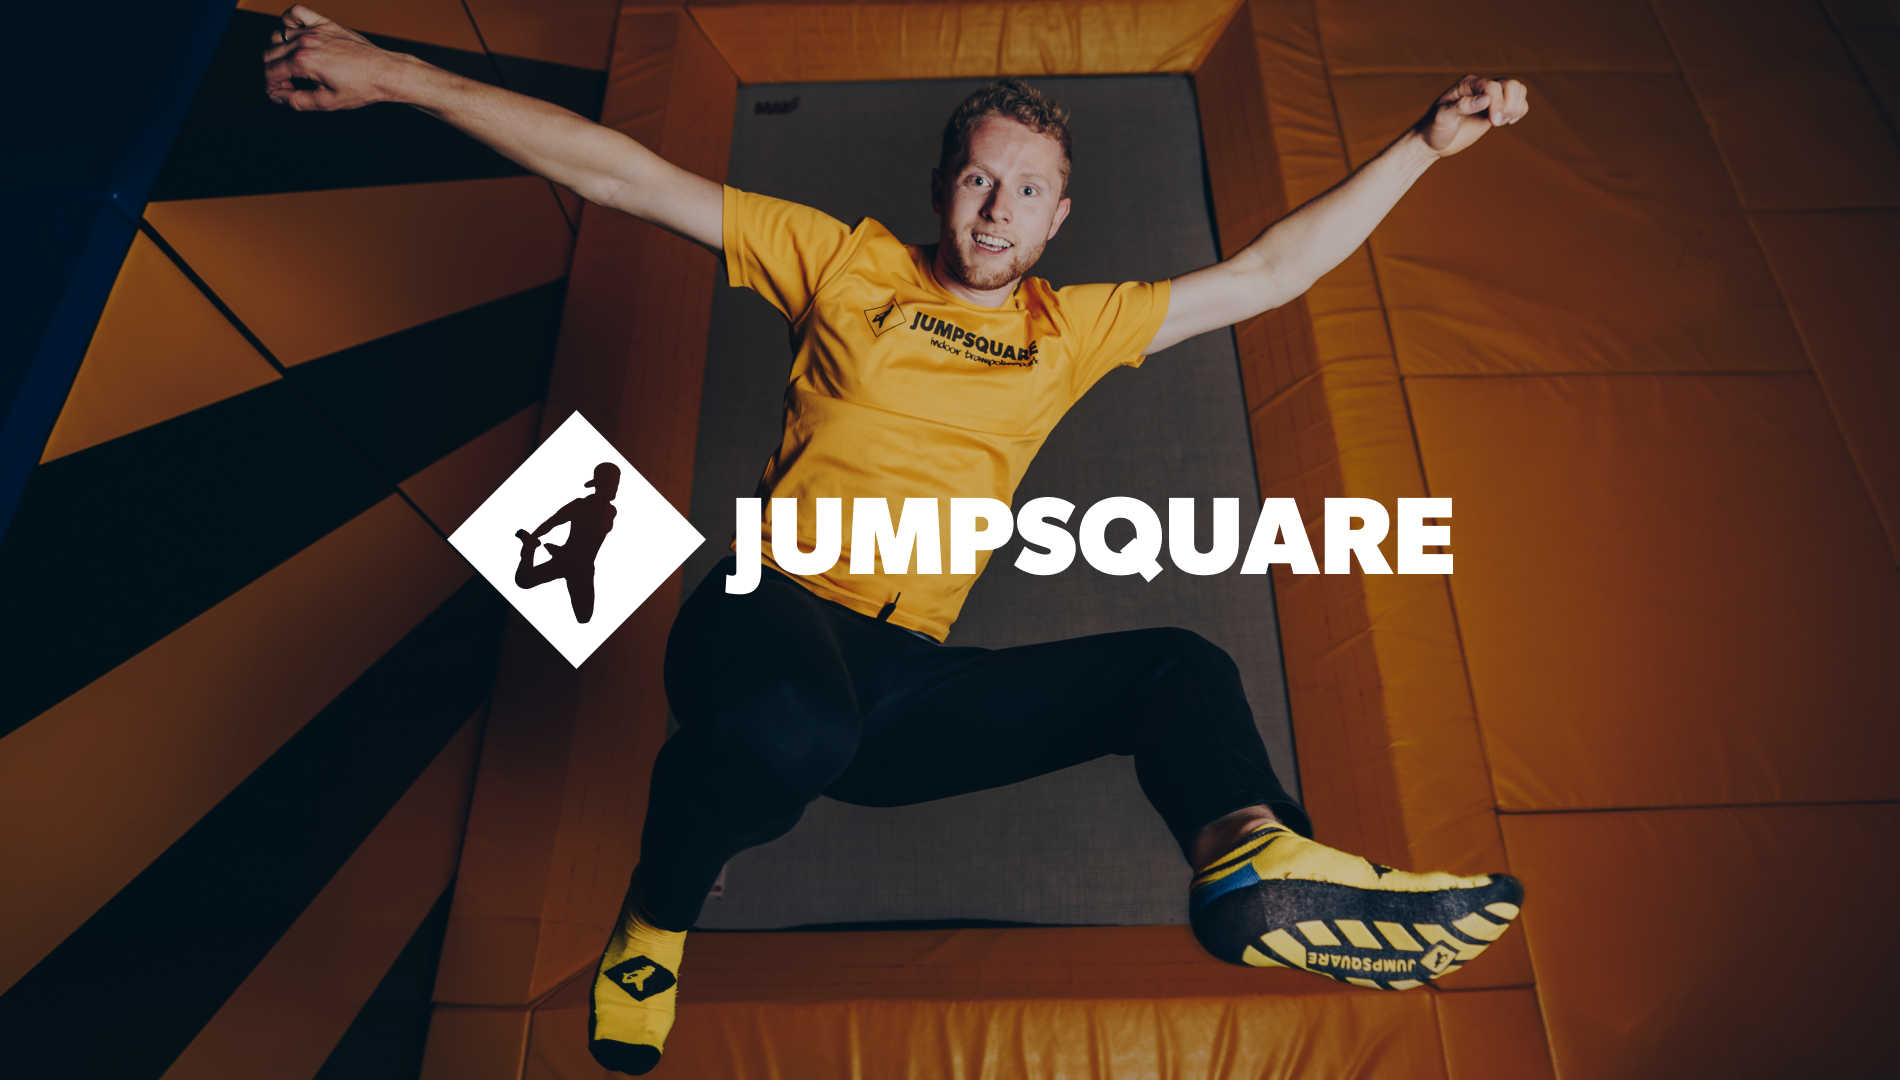 careers-marketing-jumpsquare.png